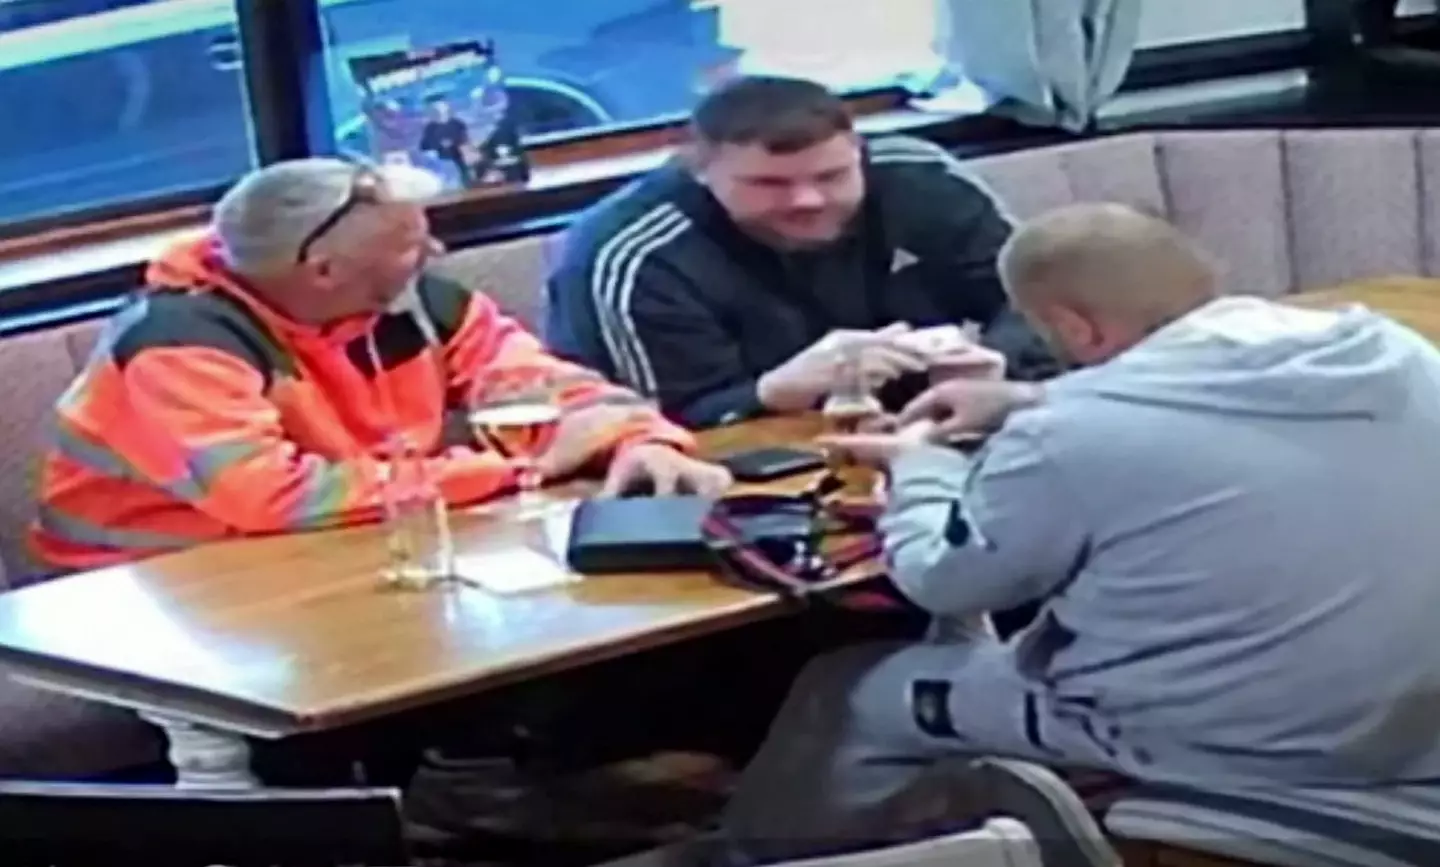 The footage shows a workman in a hi-vis jacket chatting with two mates at a table.